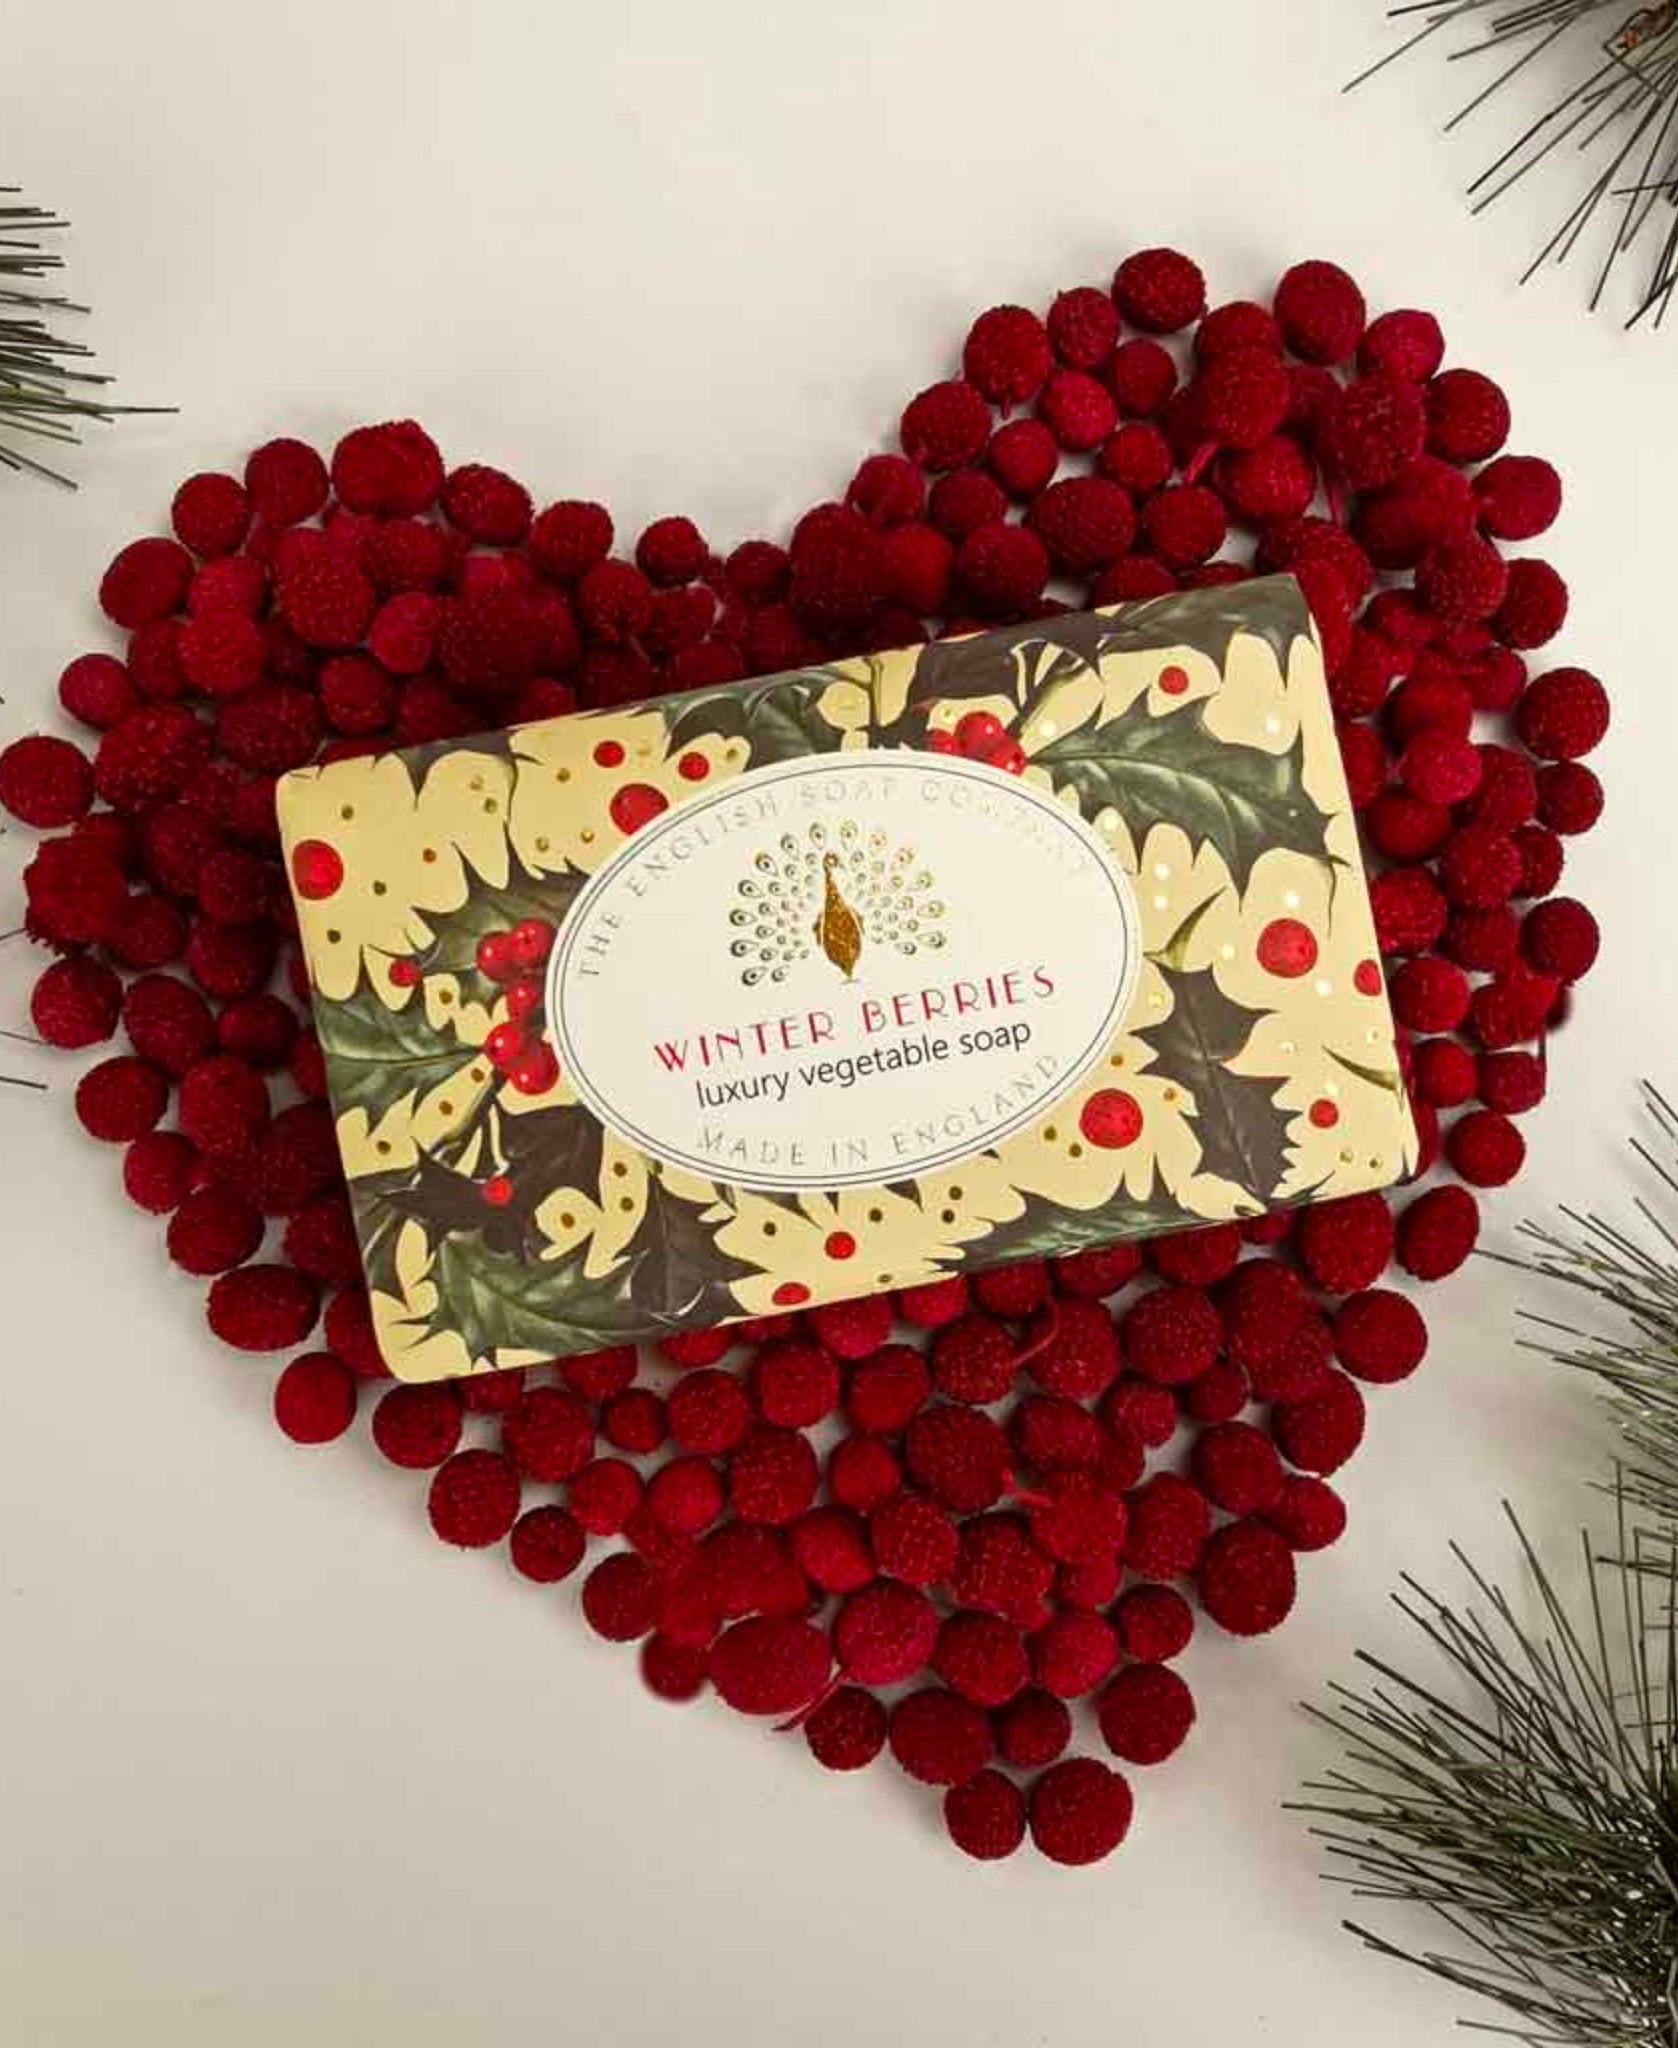 Winter Berries Soap Bar - by English Soap Co.